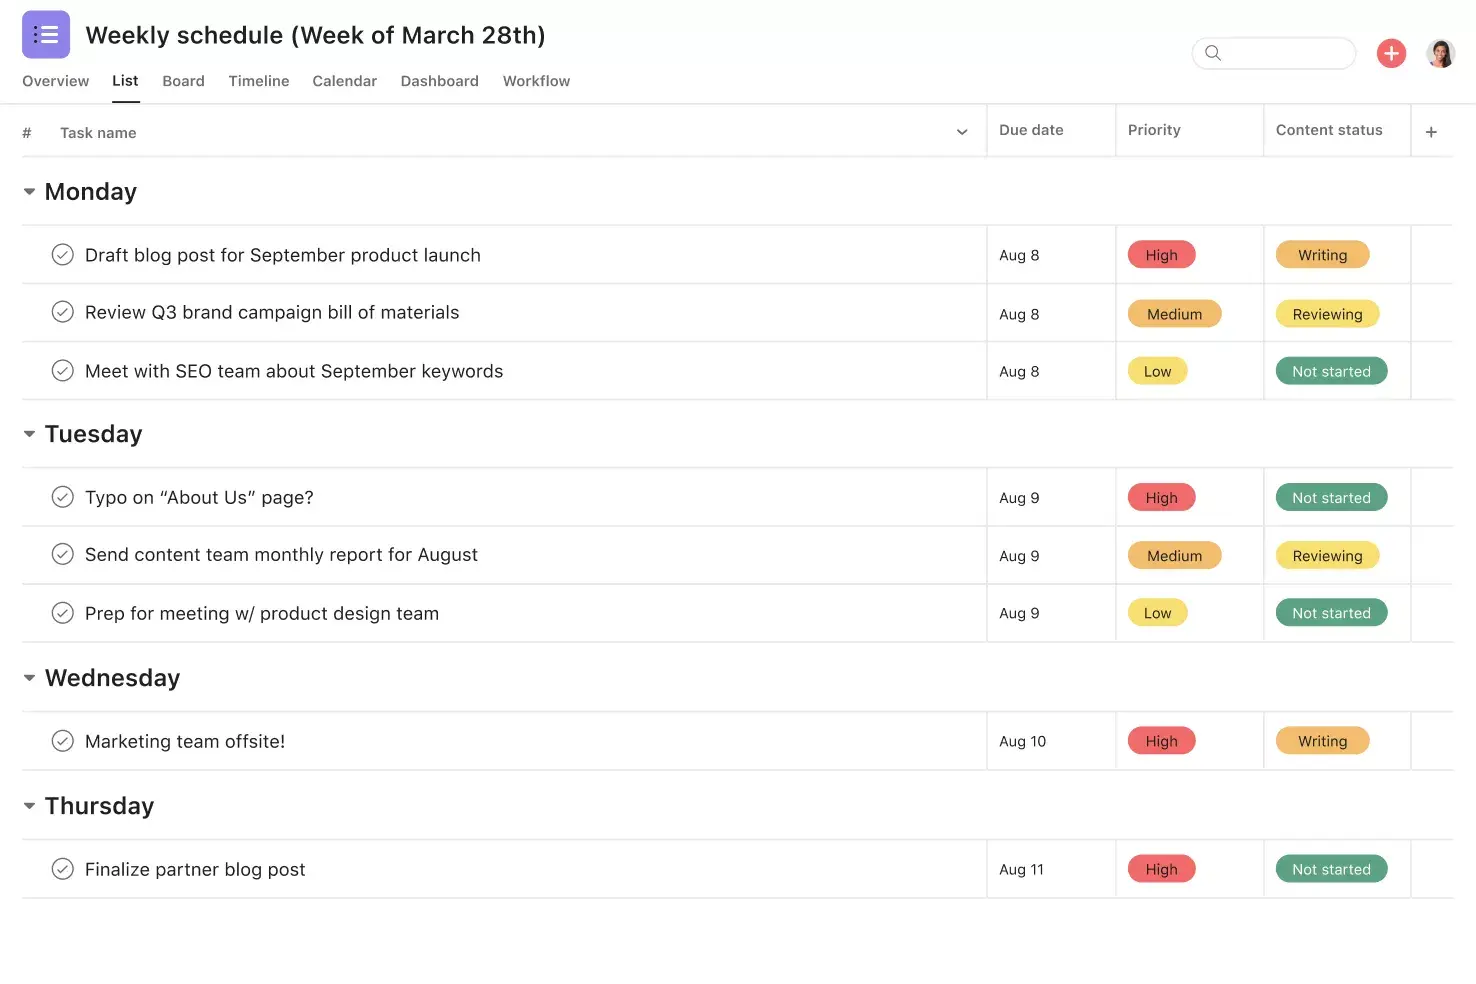 [Product ui] Weekly schedule sorted by priority and status (list view)